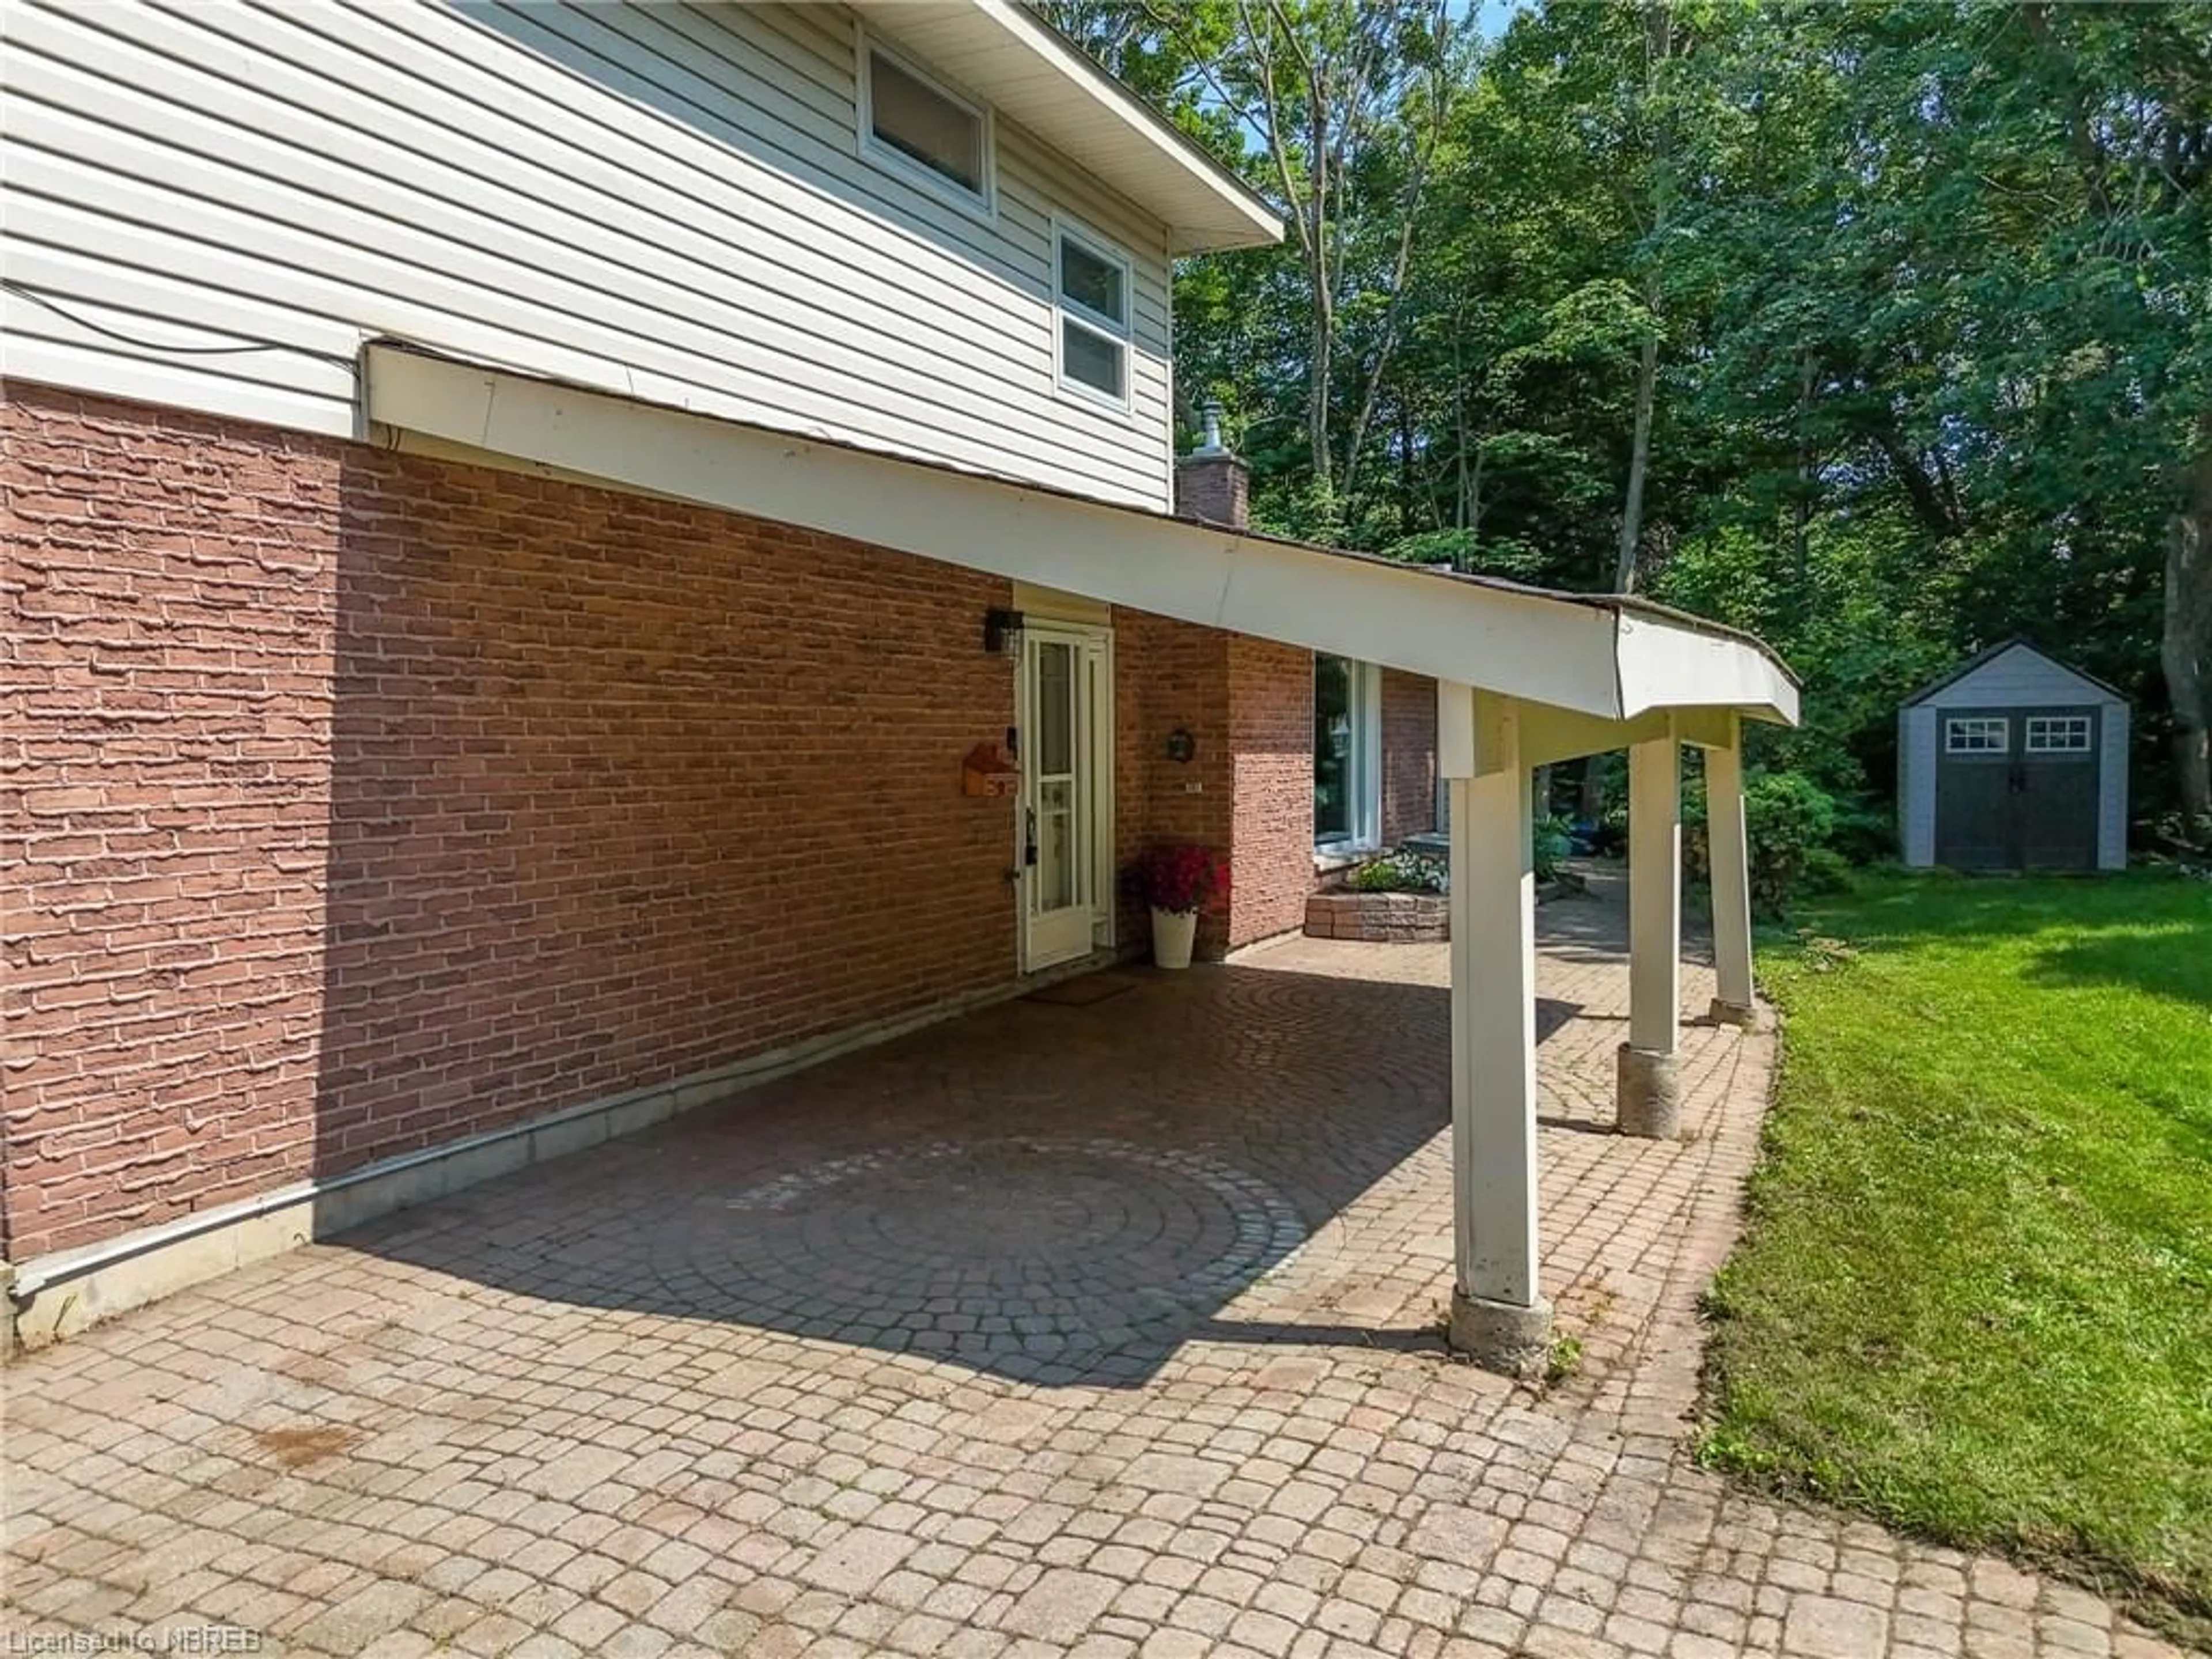 Home with brick exterior material for 14 Birch St, North Bay Ontario P1A 1R8